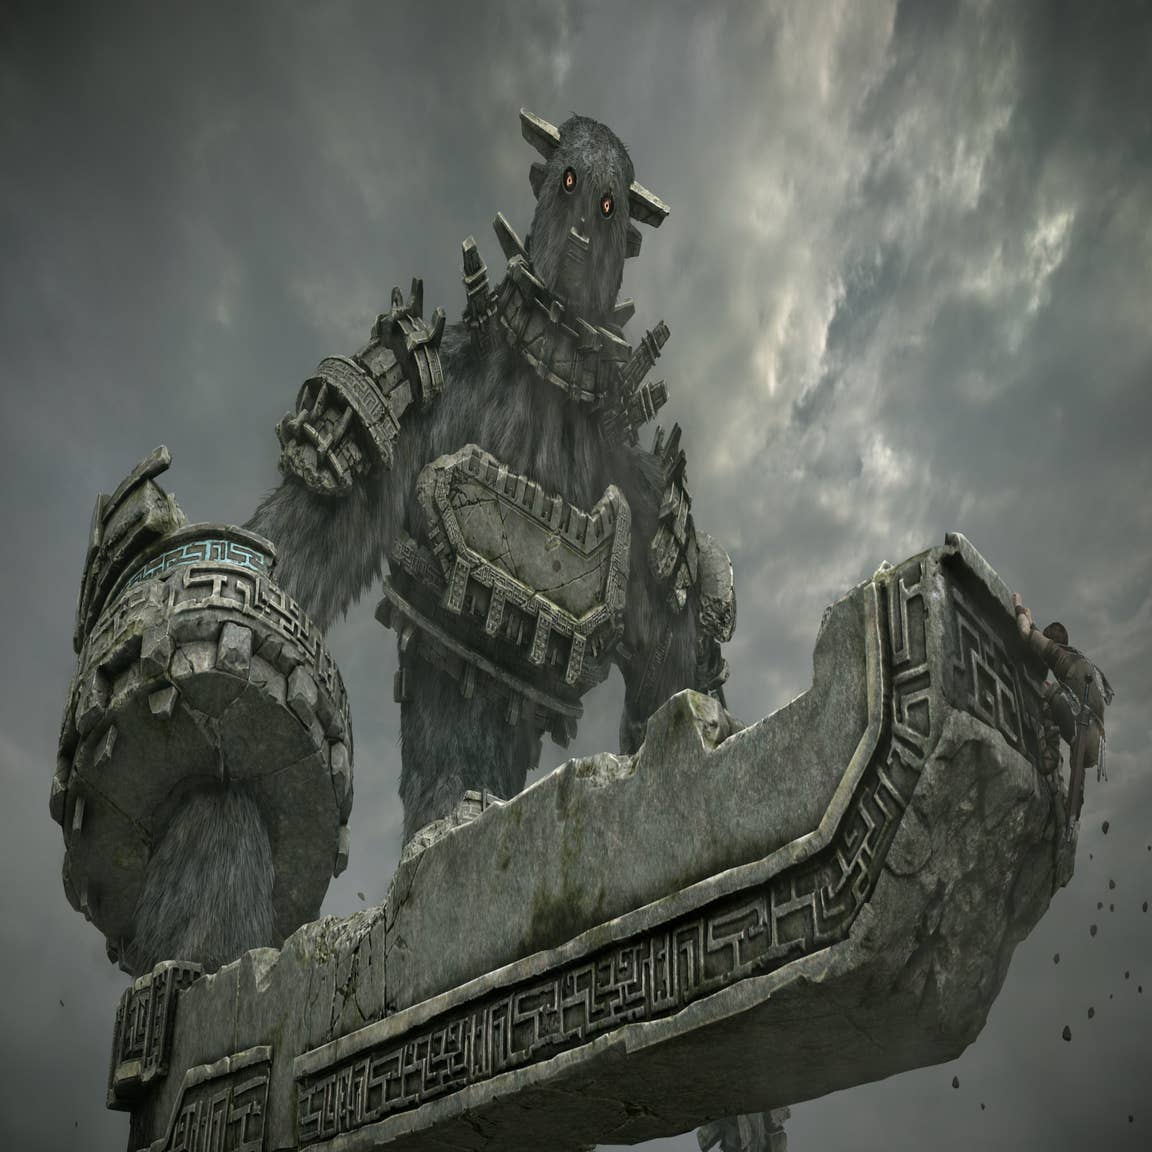 Shadow of the Colossus' PS4 remake exceeds the original